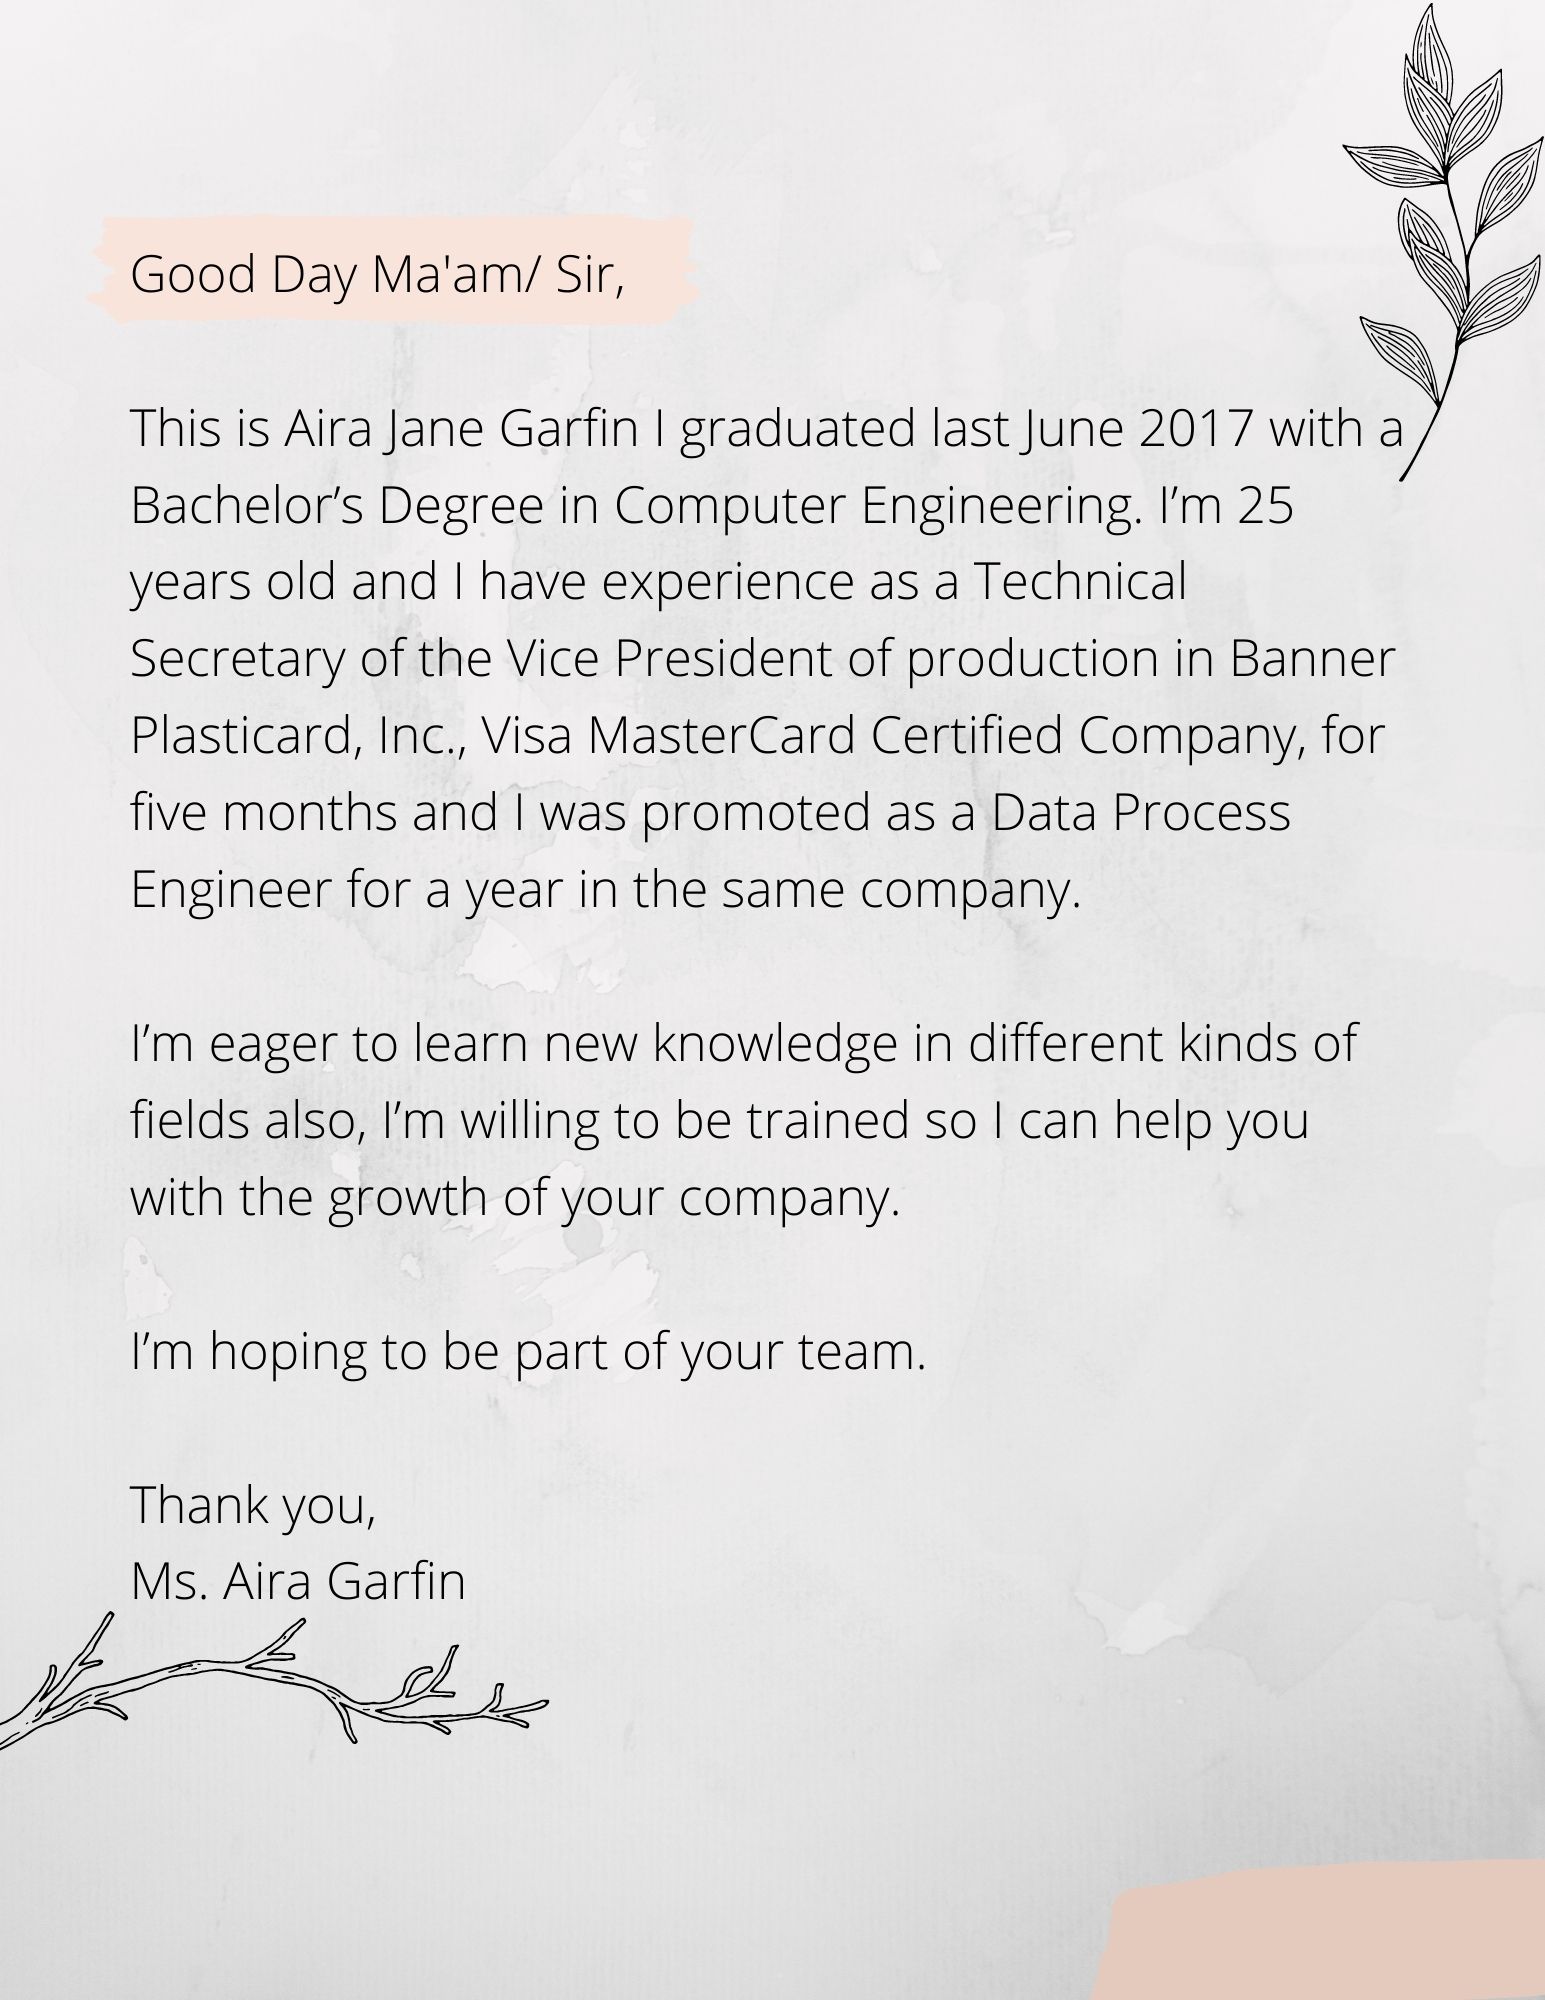 Good Day Ma'am_ Sir This is Aira Jane Garfin I graduated last June 2017 with a Bachelor’s Degree in Computer Engineering. I’m 25 years old has experience as Technical Secretary of the Vice President of production i